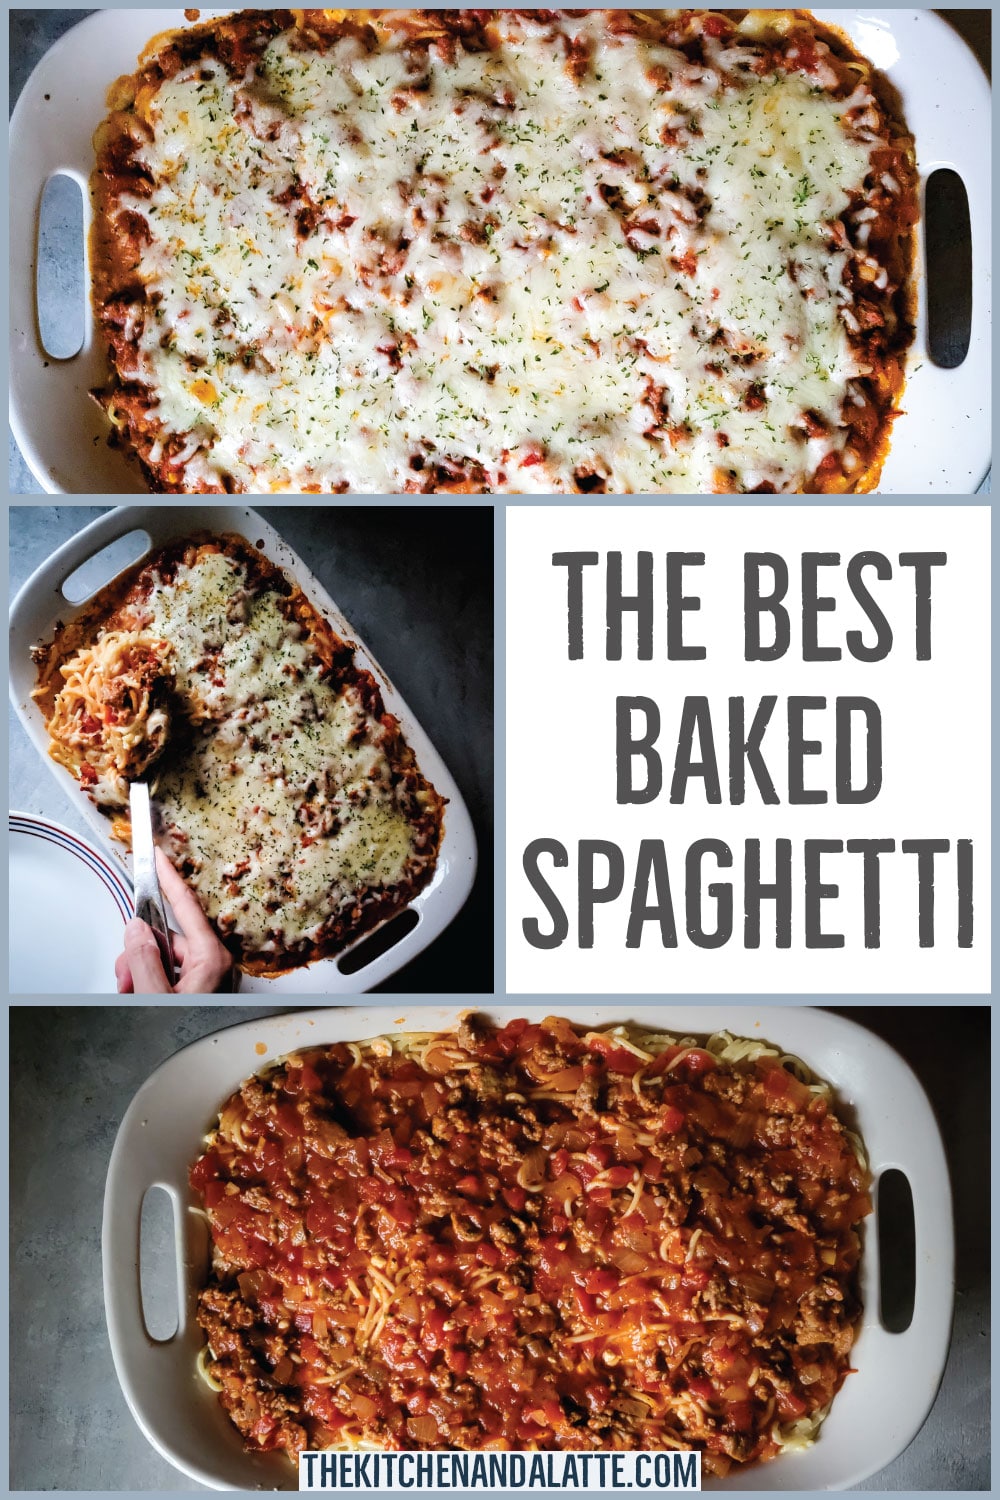 The best baked spaghetti Pinterest image. 3 images, 2 of them are the casserole after baking ready to serve and the other is the casserole before adding the top layer of cheese.